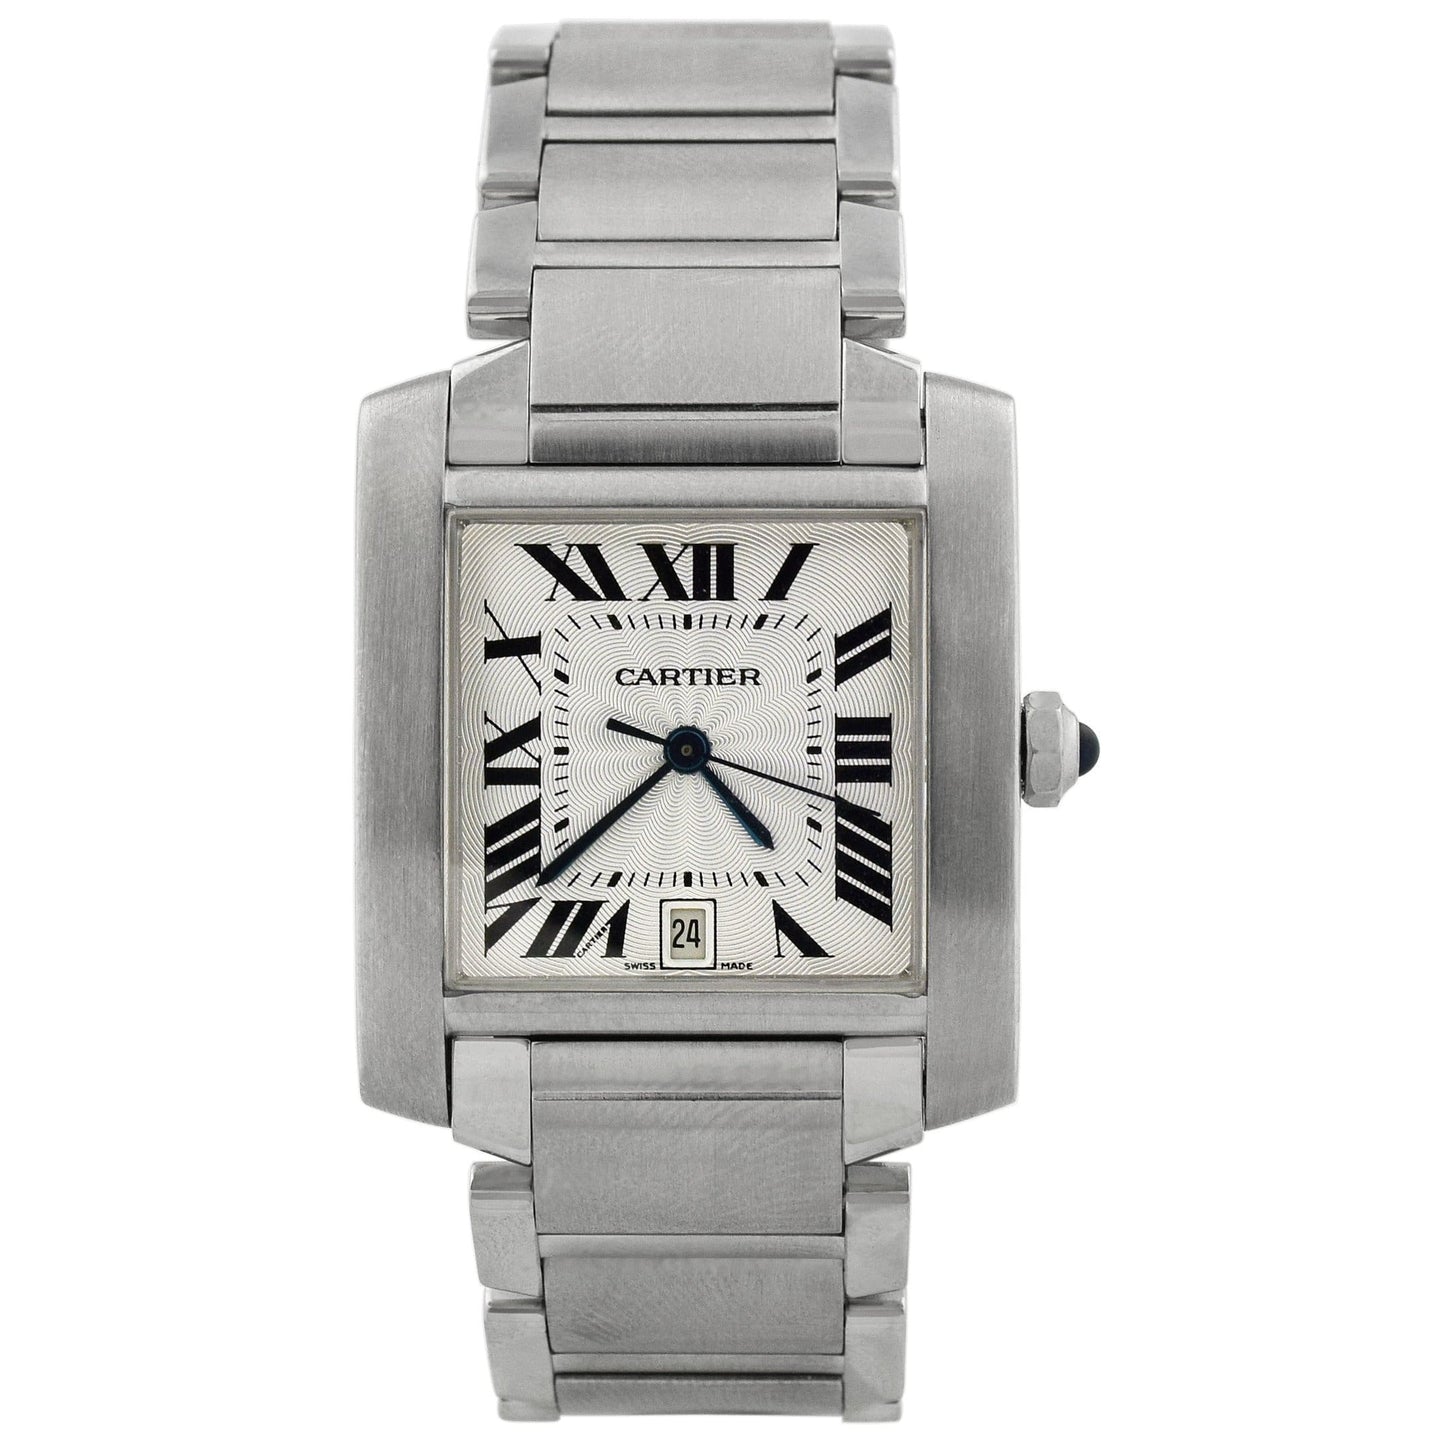 Cartier Tank Francaise Stainless Steel 32 x 28.15mm Silver Roman Dial Watch Reference# W51002Q3